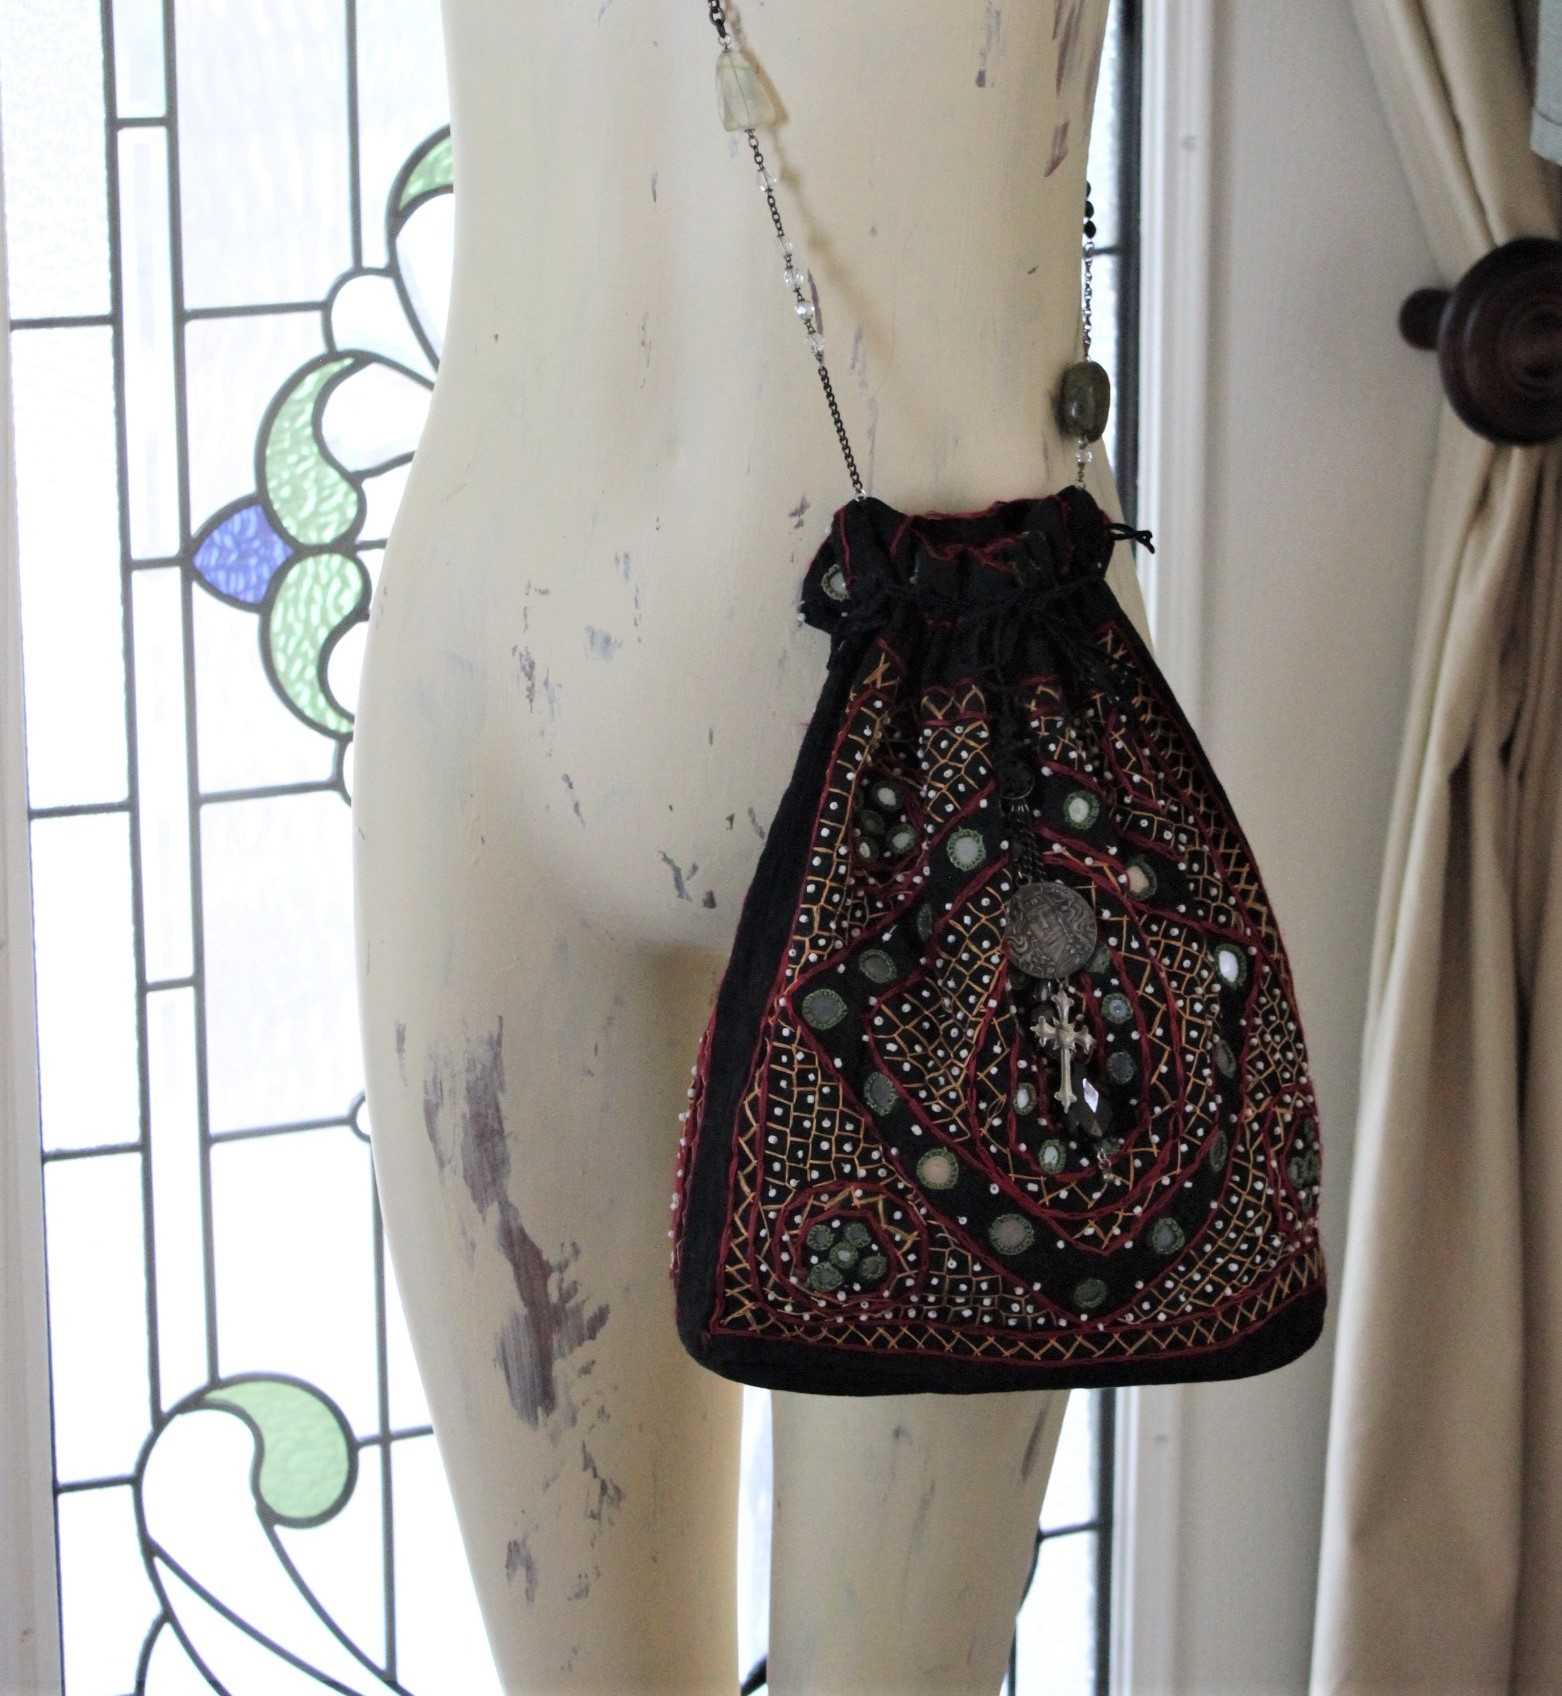 Vintage Banjara Gypsy Drawstring Bag with Goddess Medal, Antique & Vintage Chain Strap with Faceted Gemstones, Inset Mirrors, Embroidery and More!